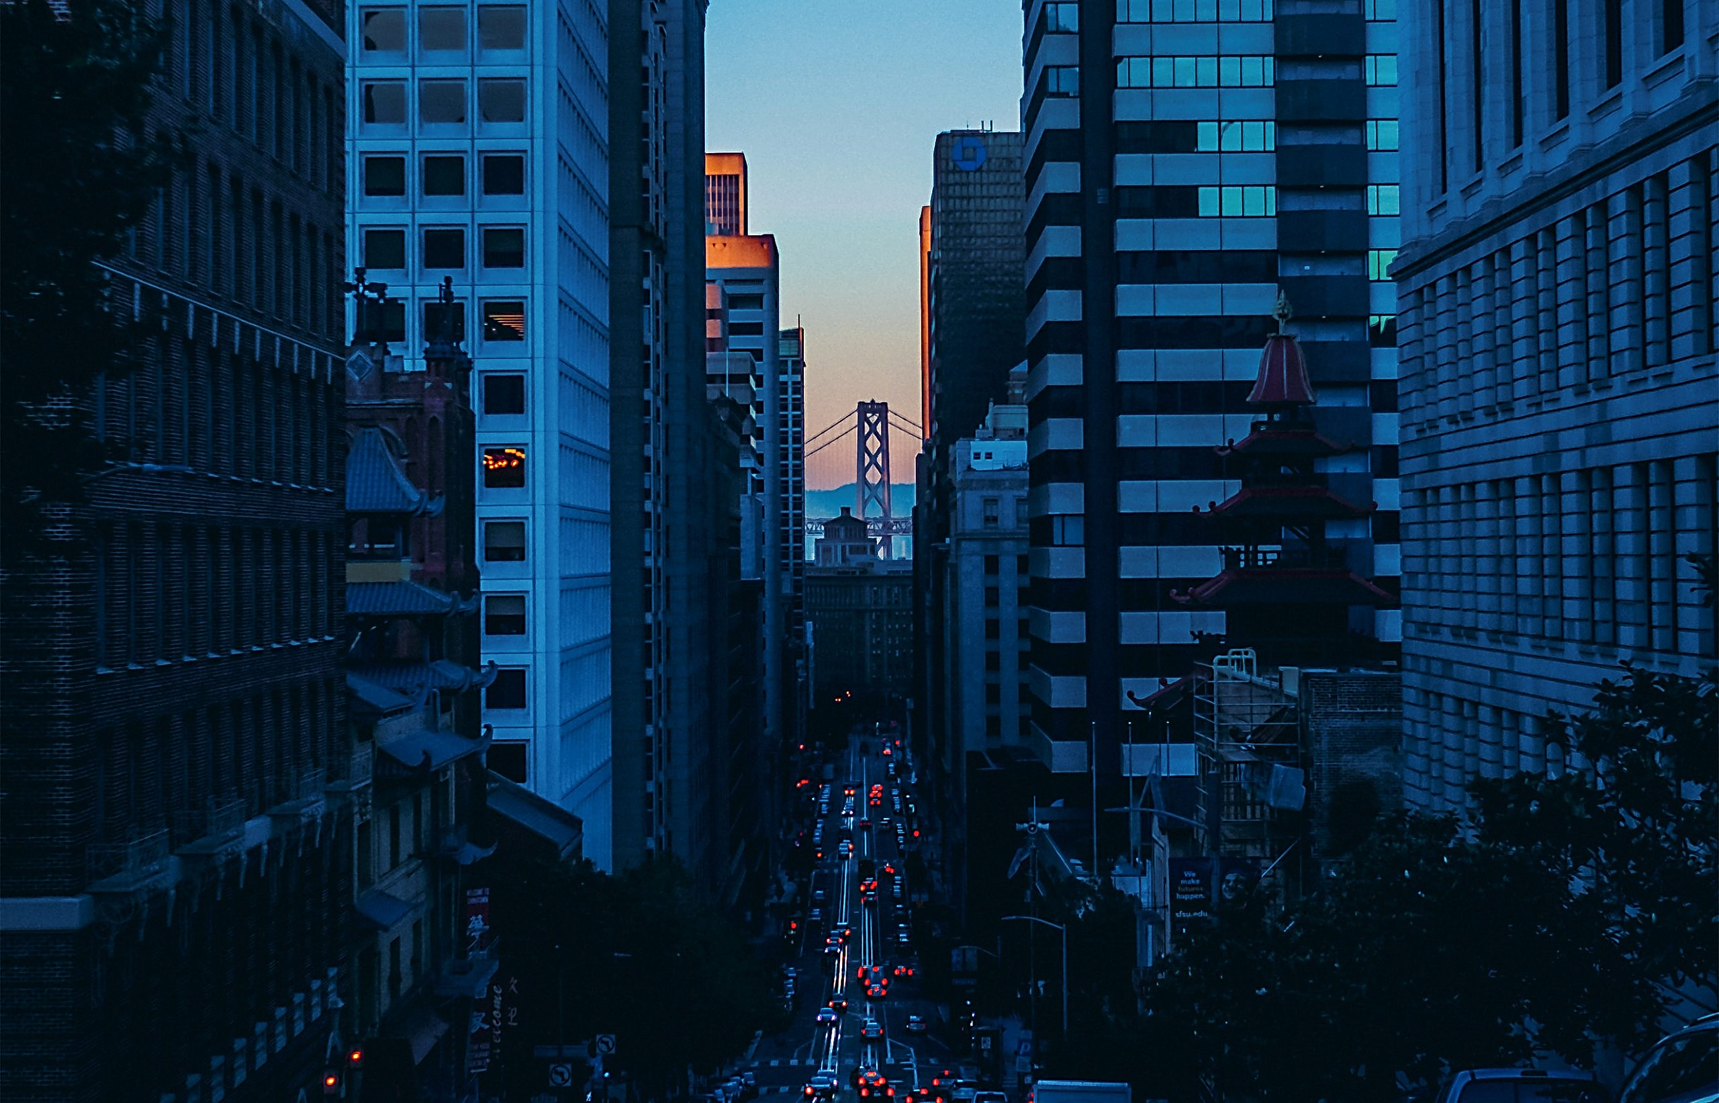 An Evening View of a Street in California, USA.